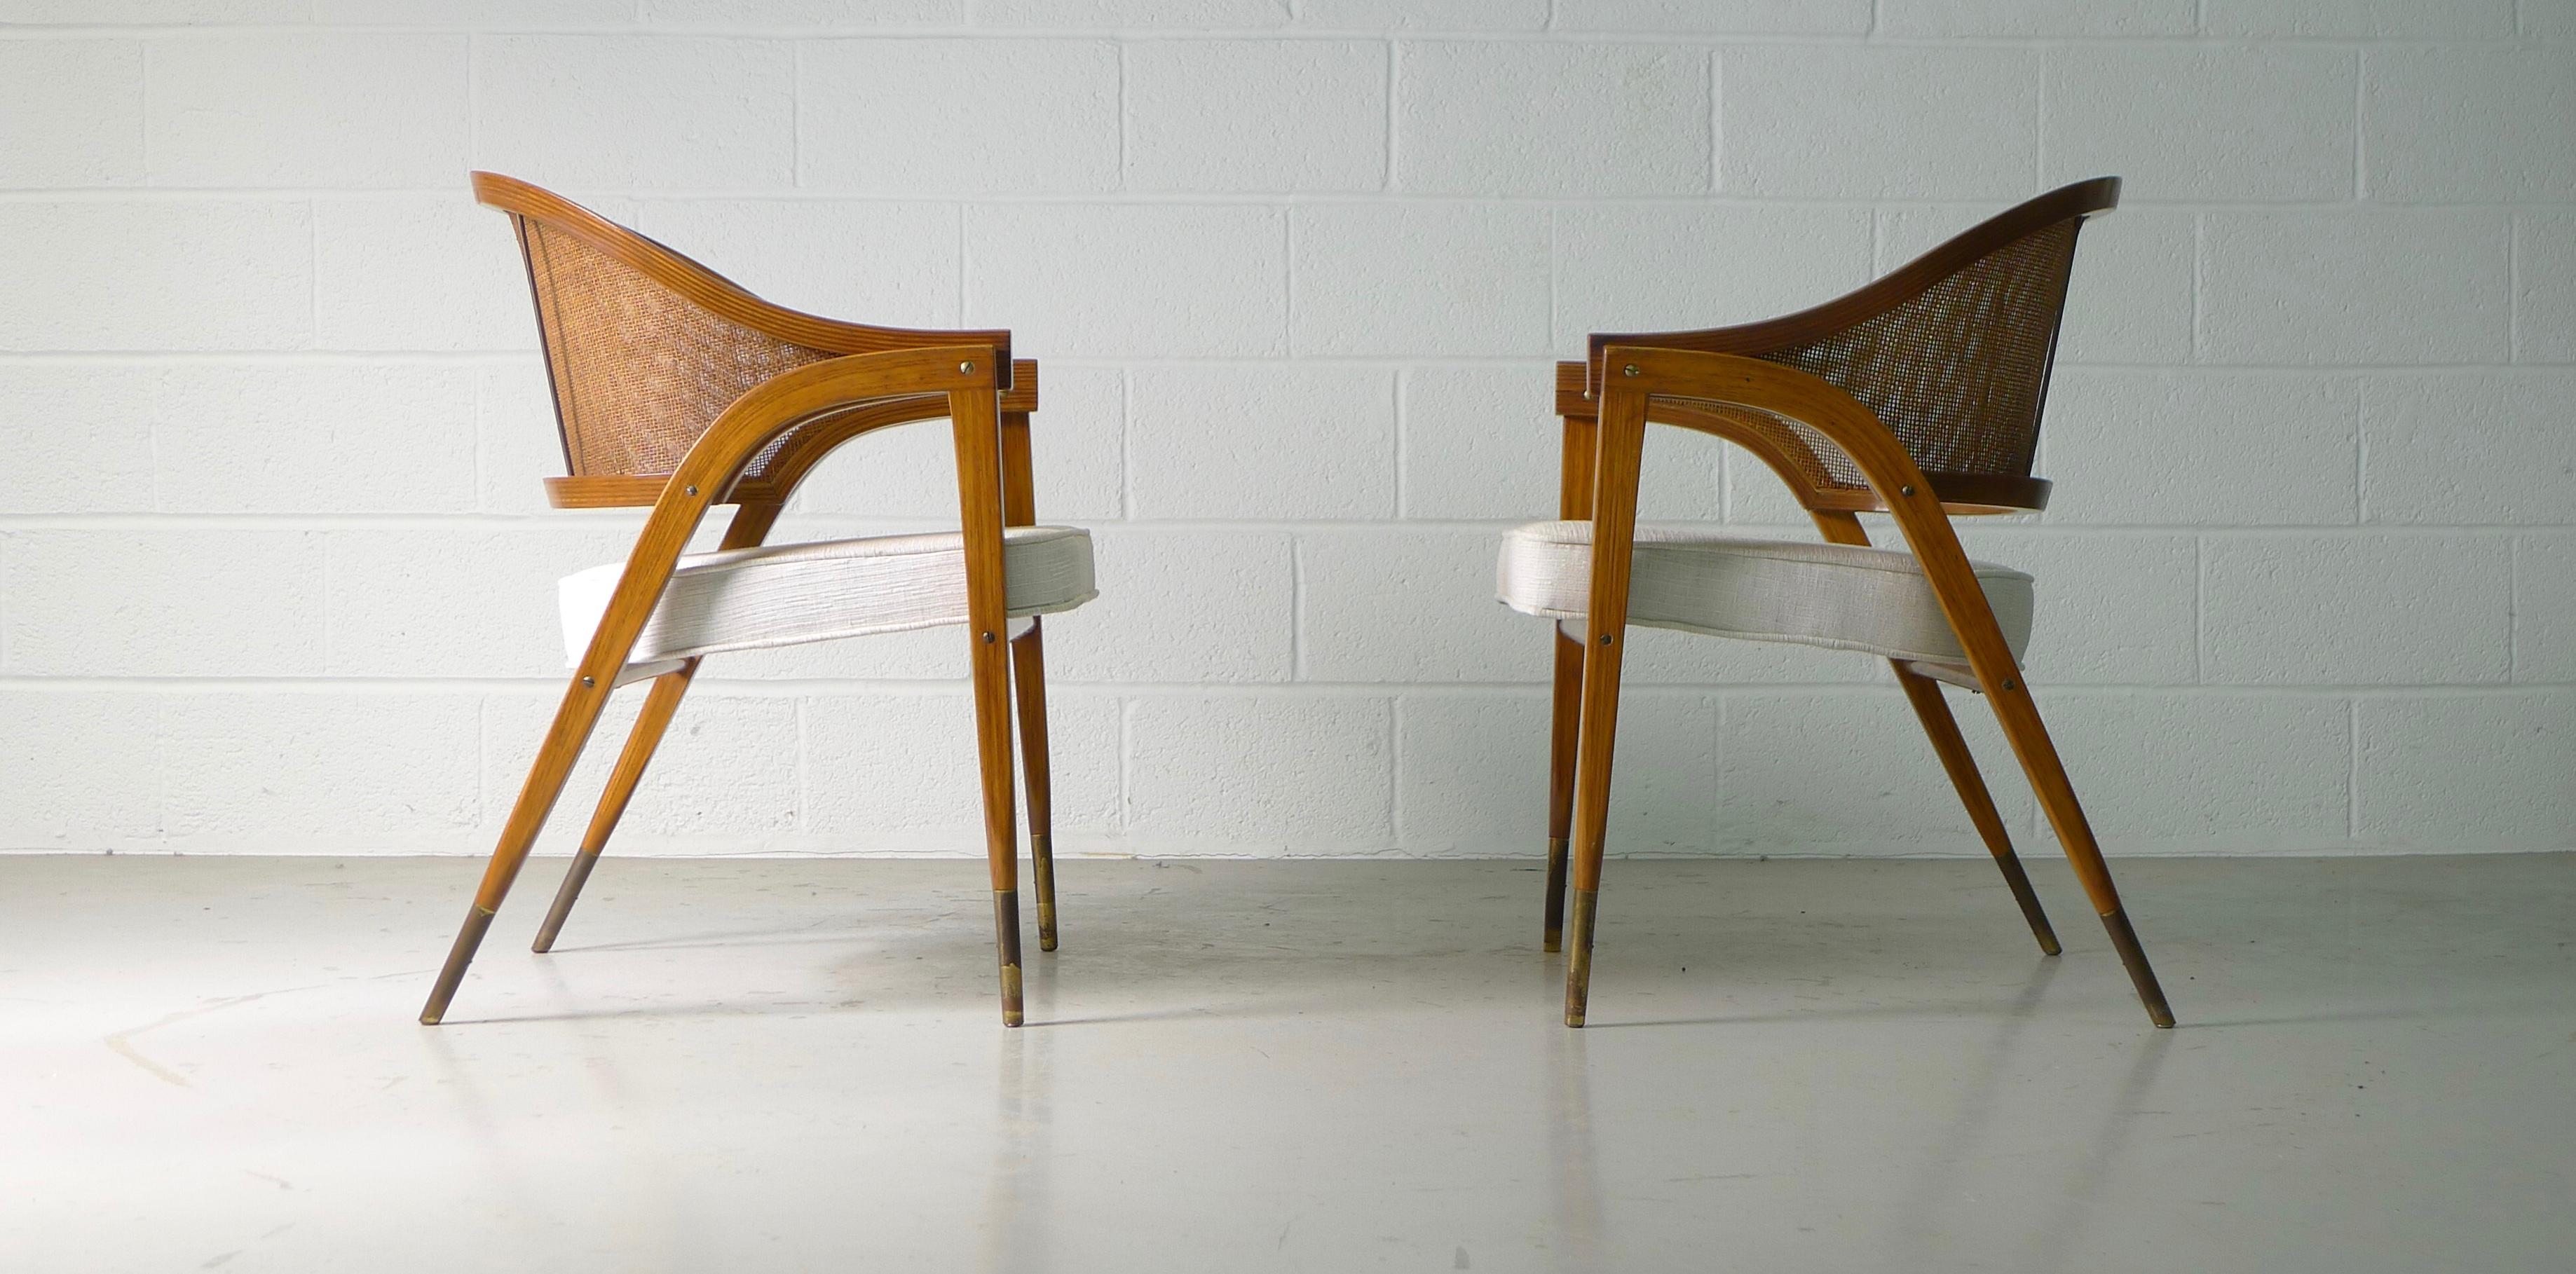 Edward Wormley for Dunbar, Berne, Indiana. Pair of armchairs model No. 5480 , designed mid-1950s and constructed of laminated ash, caned backrest, brass detailing and newly upholstered seat. Brass Sabots with nice original patina.